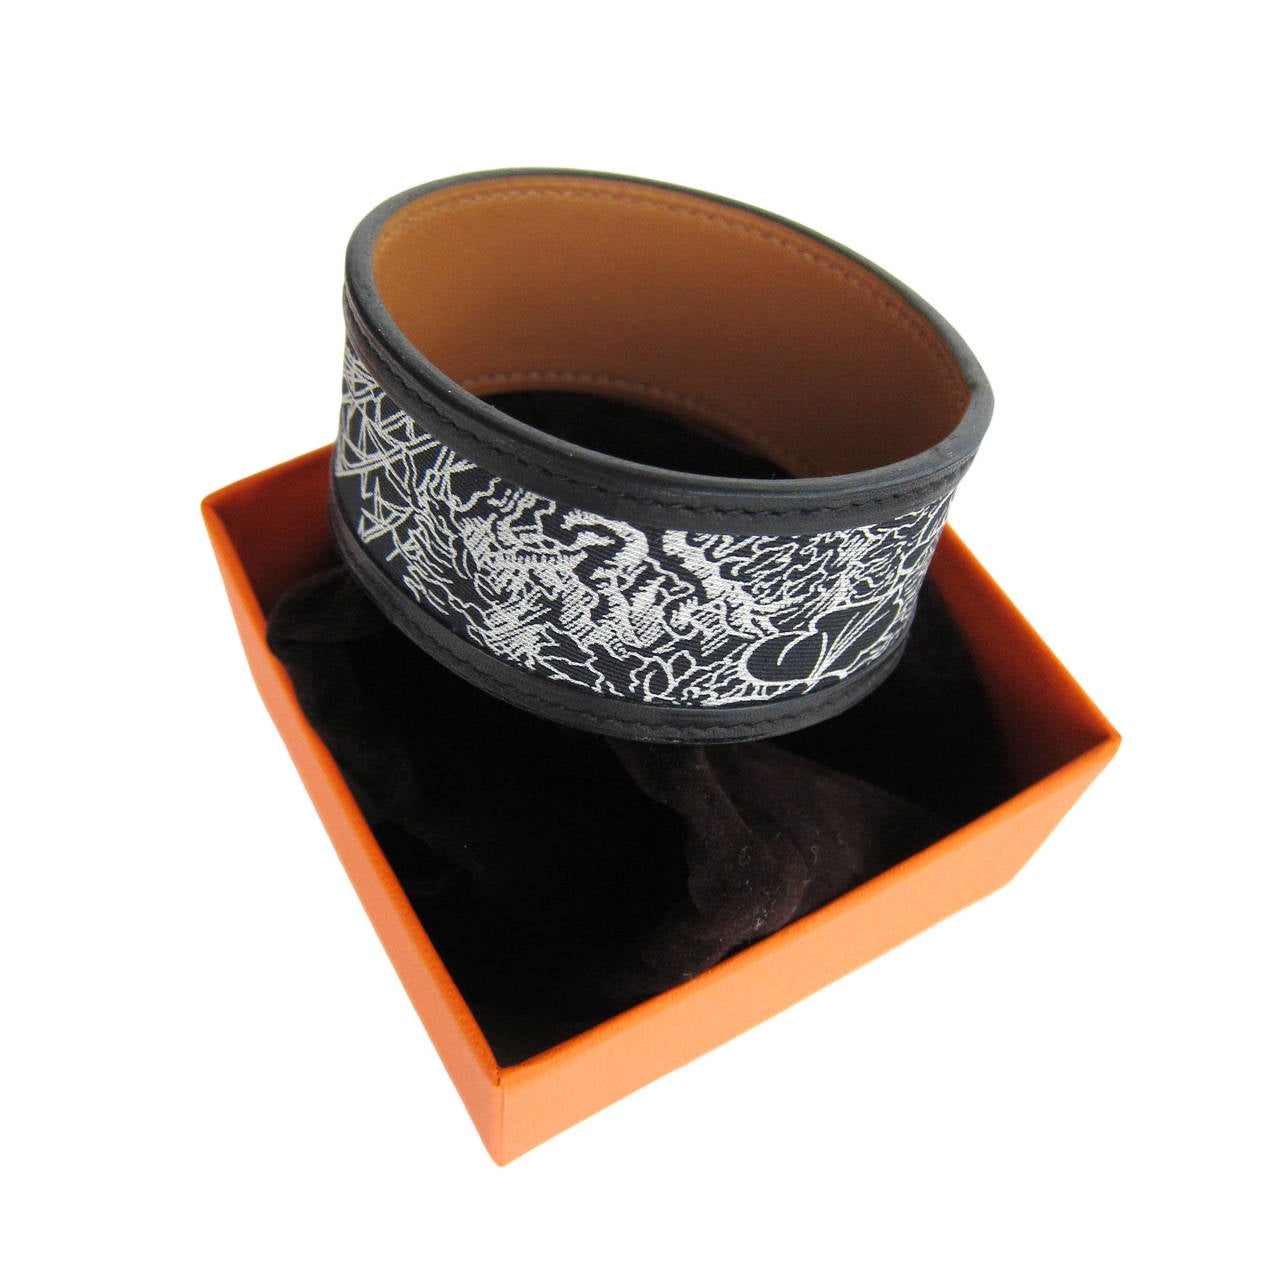 Hermes Black White Silk Leather Petit H Bracelet Cuff One of a Kind

World Exclusive from the Hermes Petit H Collection
Brand New in Box 
Coming store fresh with Hermes pouch, box and ribbon
Silk and Leather Bracelet Petit H Bracelet
Standard